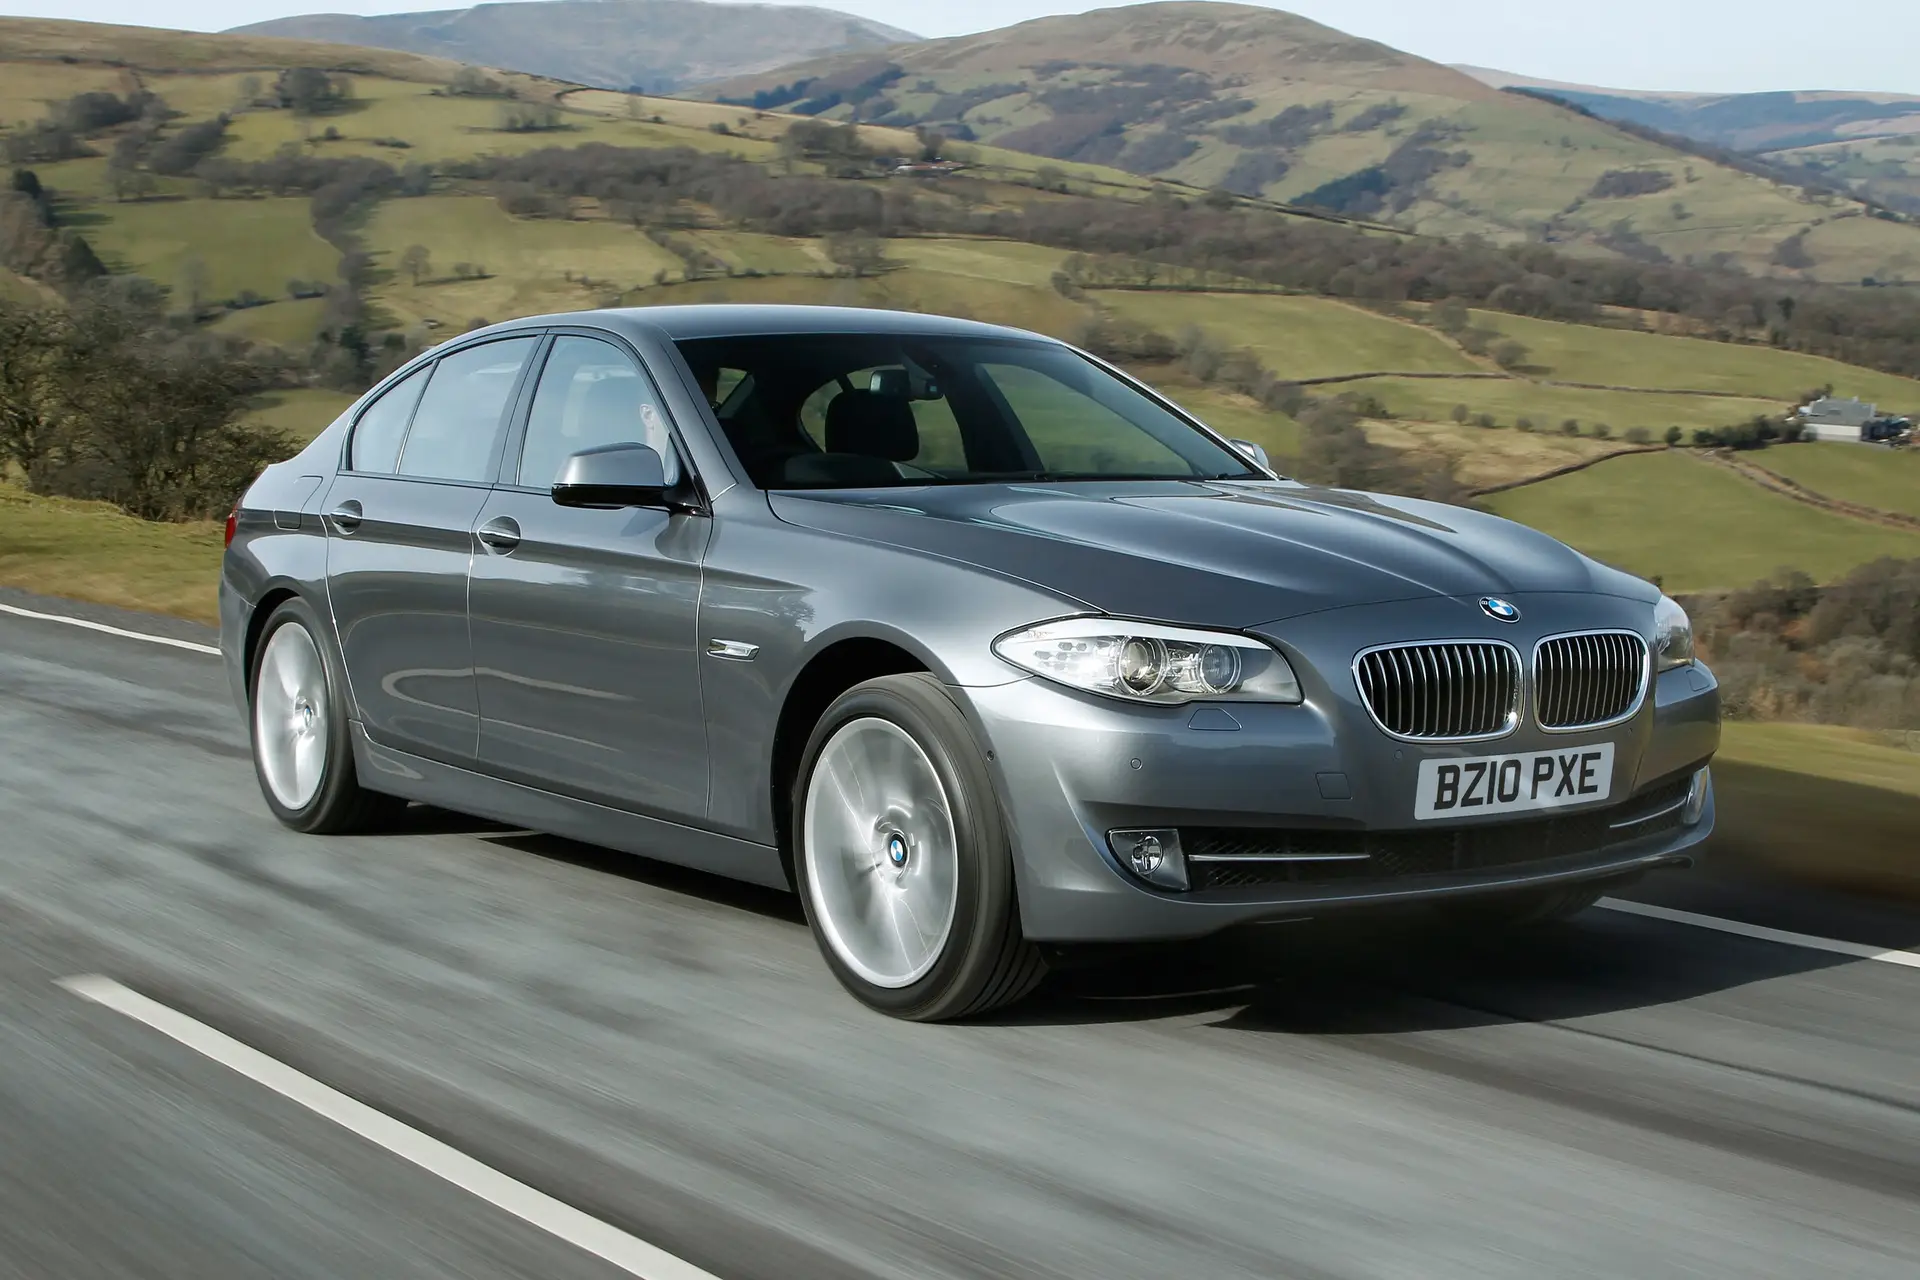 BMW 5 Series (2010-2017) Review: Exterior front three quarter photo of the BMW 5 Series on the road